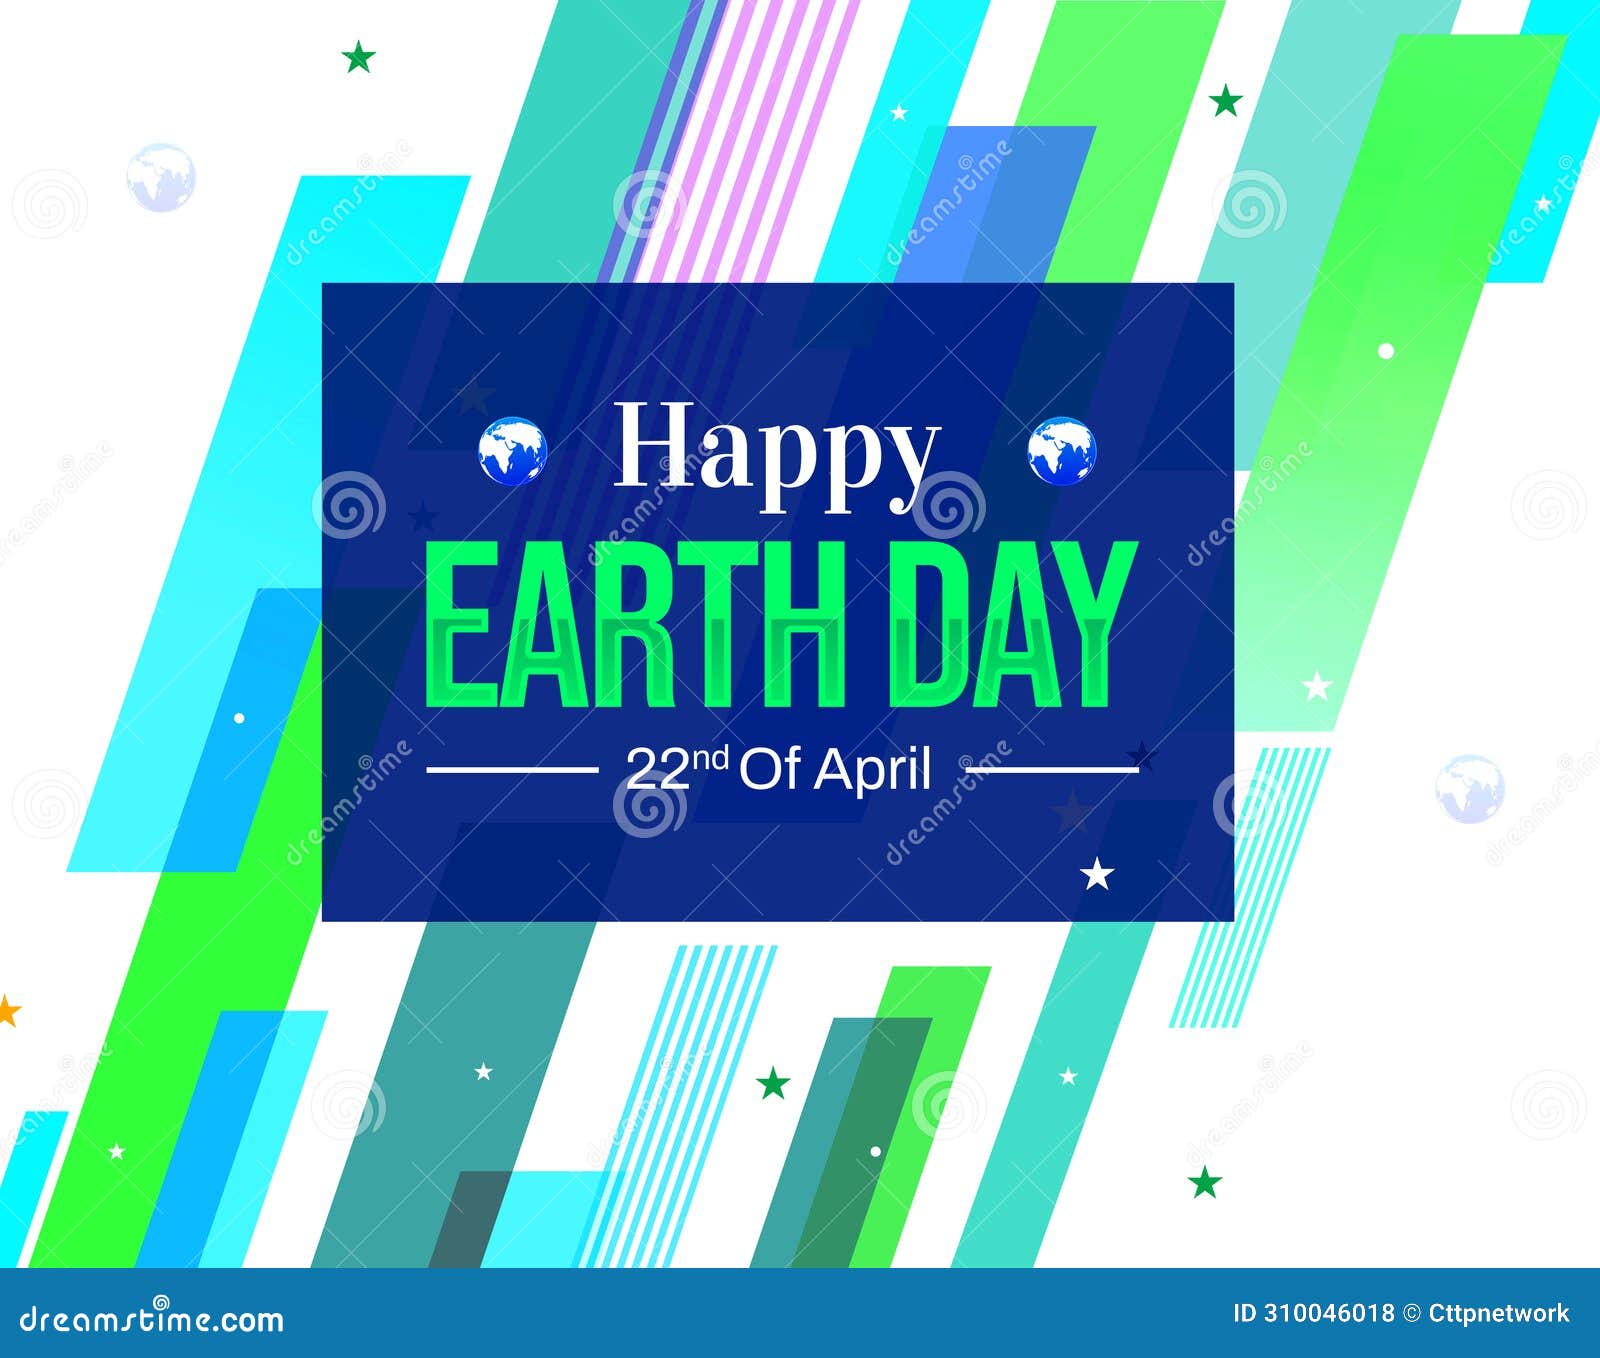 happy earth day wallpaper with colorful s and typography inside the box, backdrop . april 21st is celebrated as earth